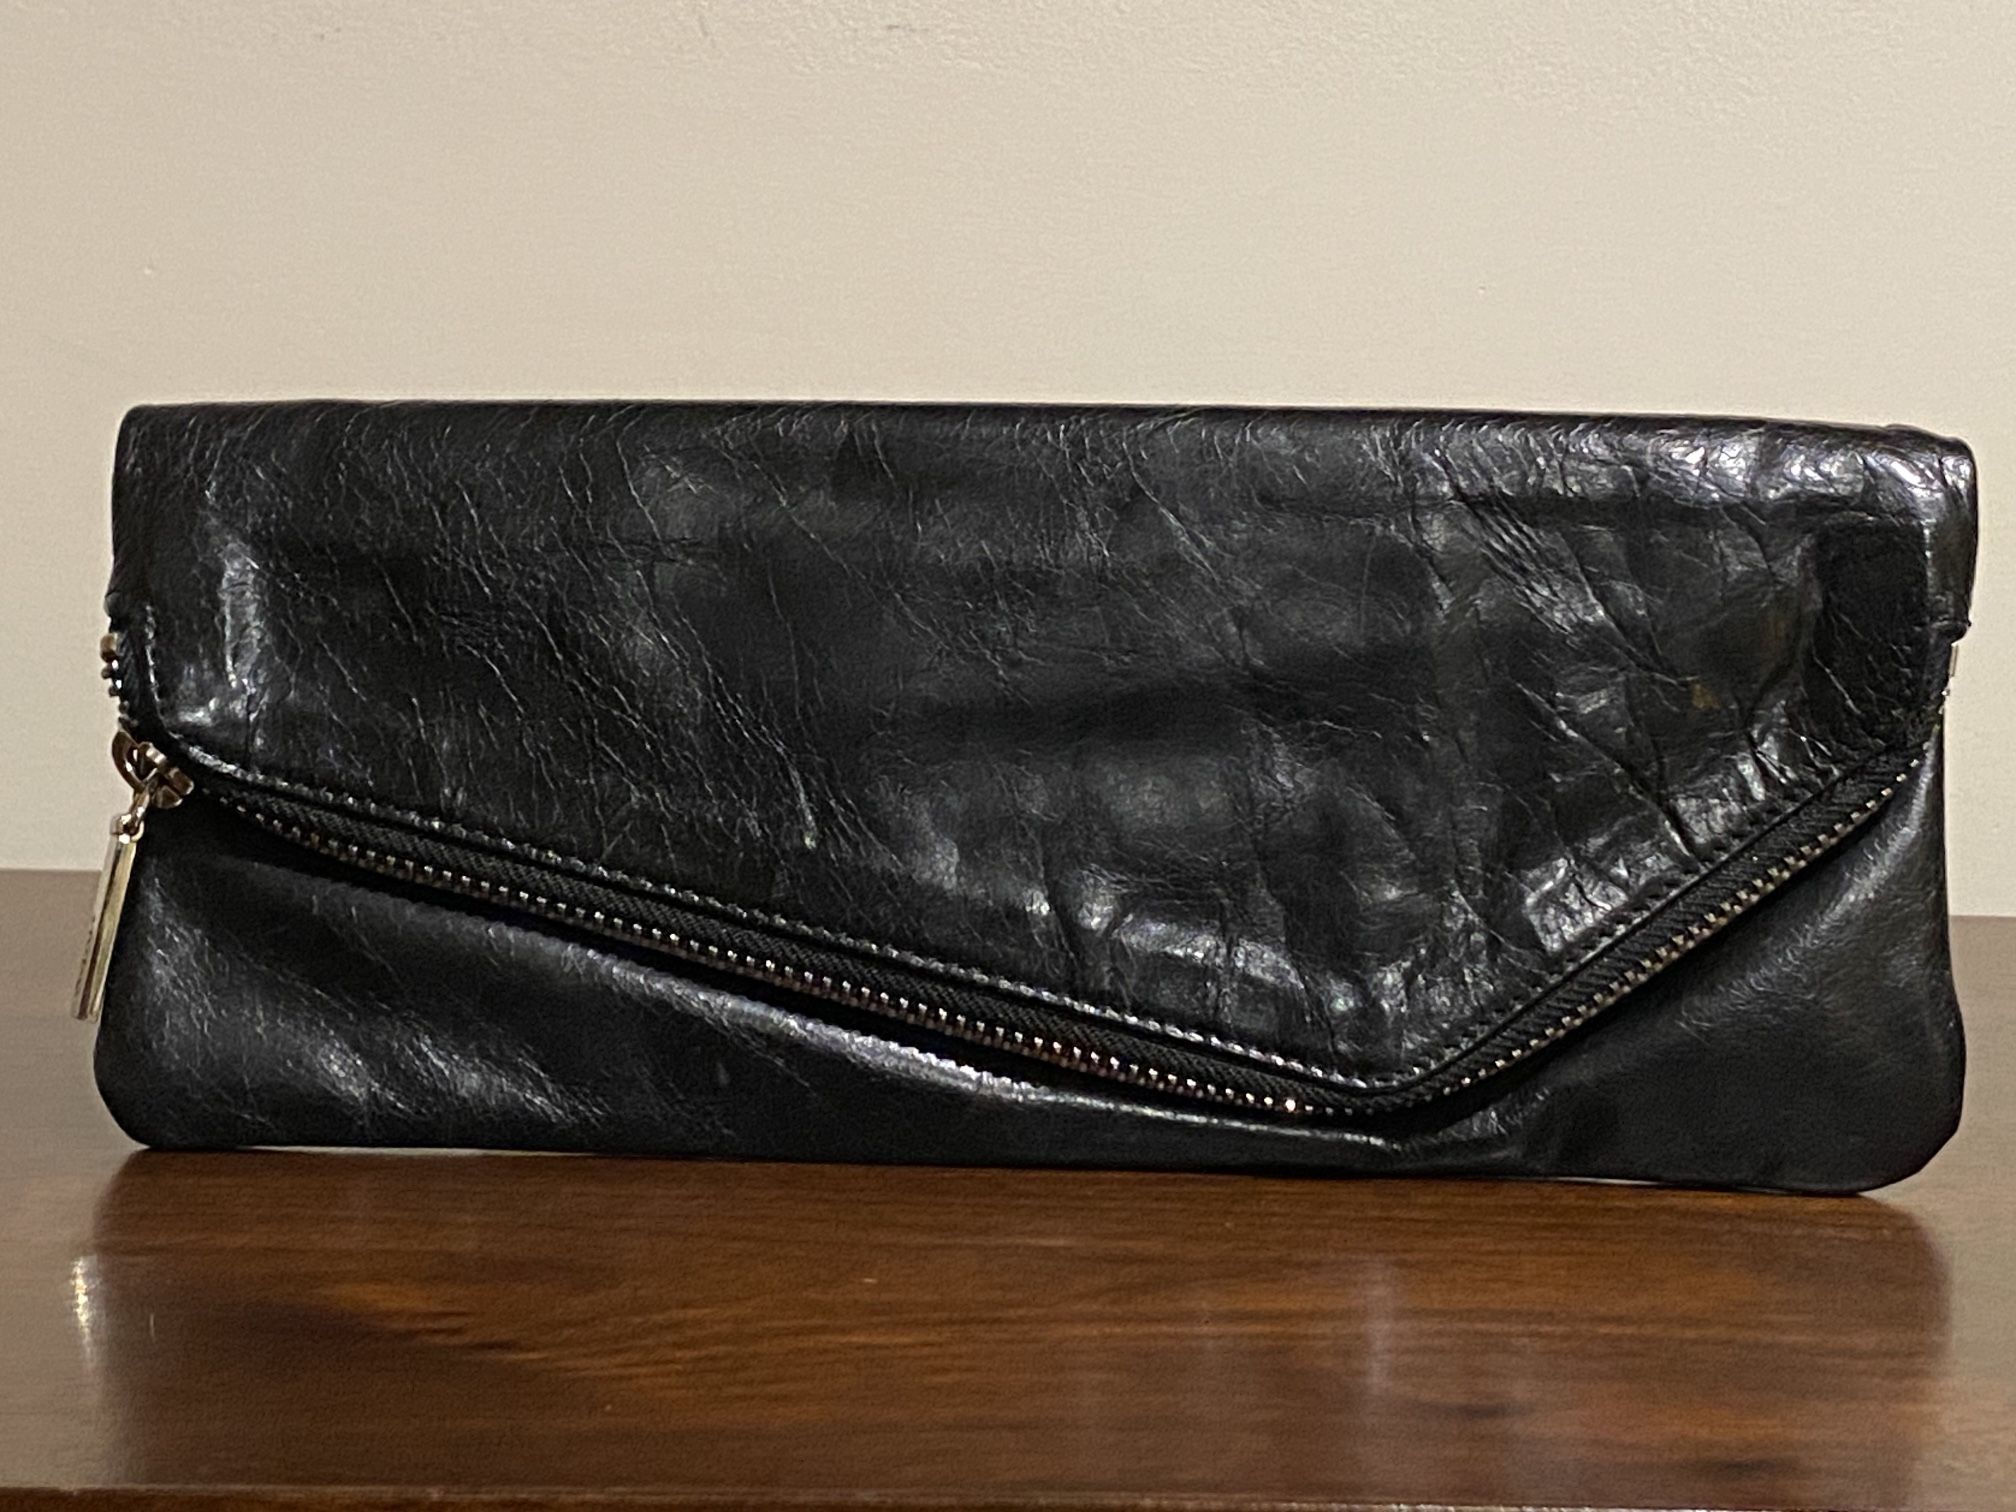 HOBO black leather envelope clutch with asymmetrical flap - IMPECCABLE CONDITION